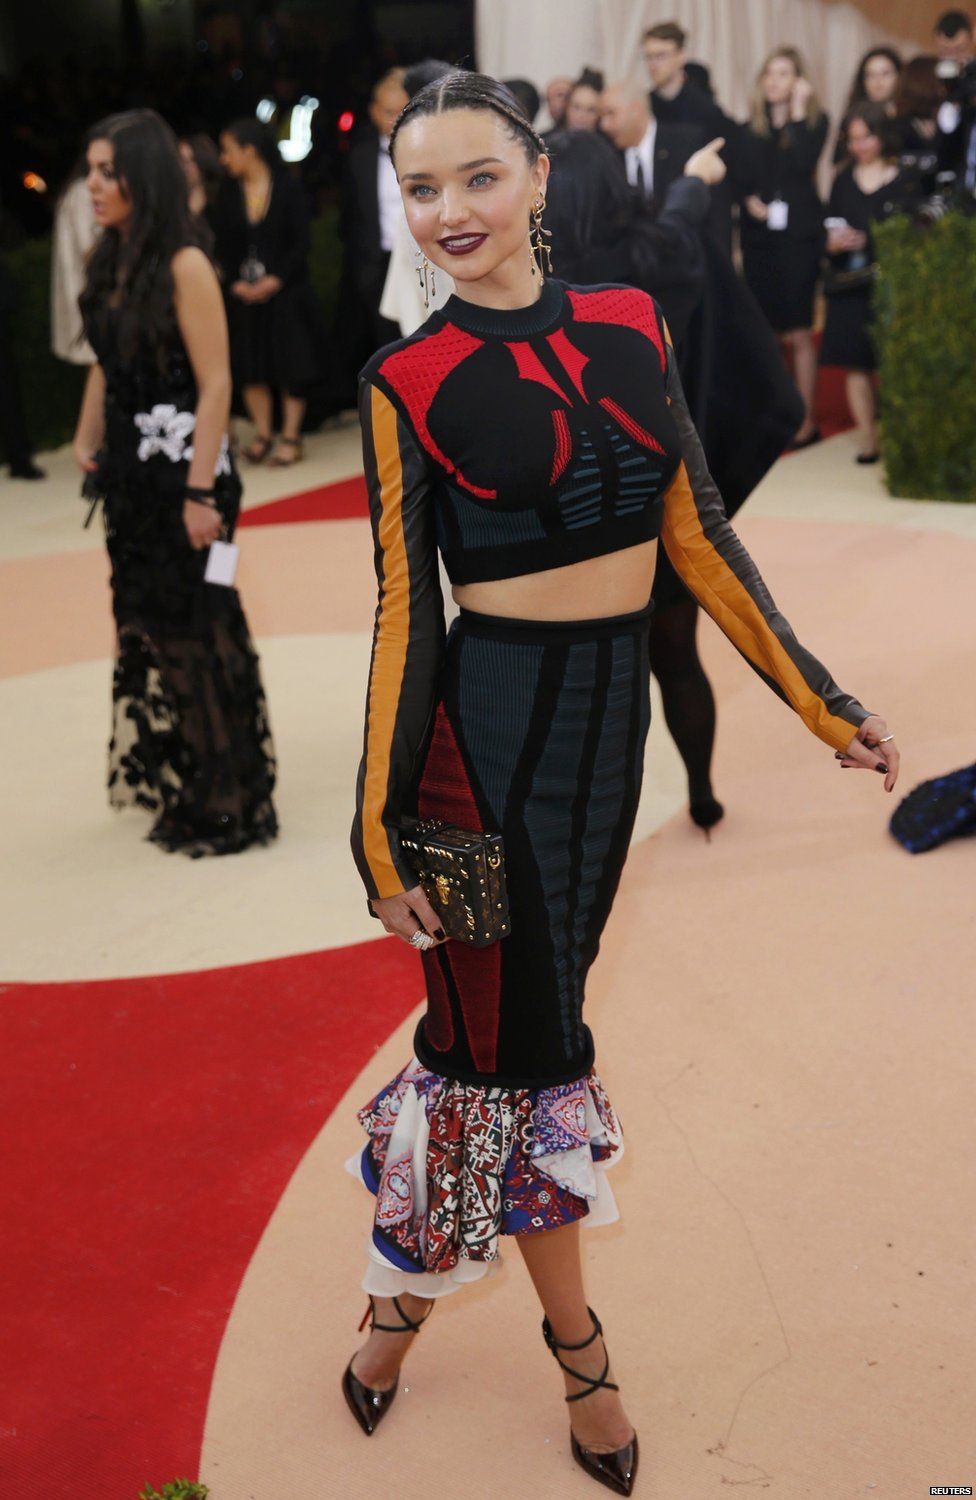 Man v machine theme at New York's Met Gala - all the pictures and ...